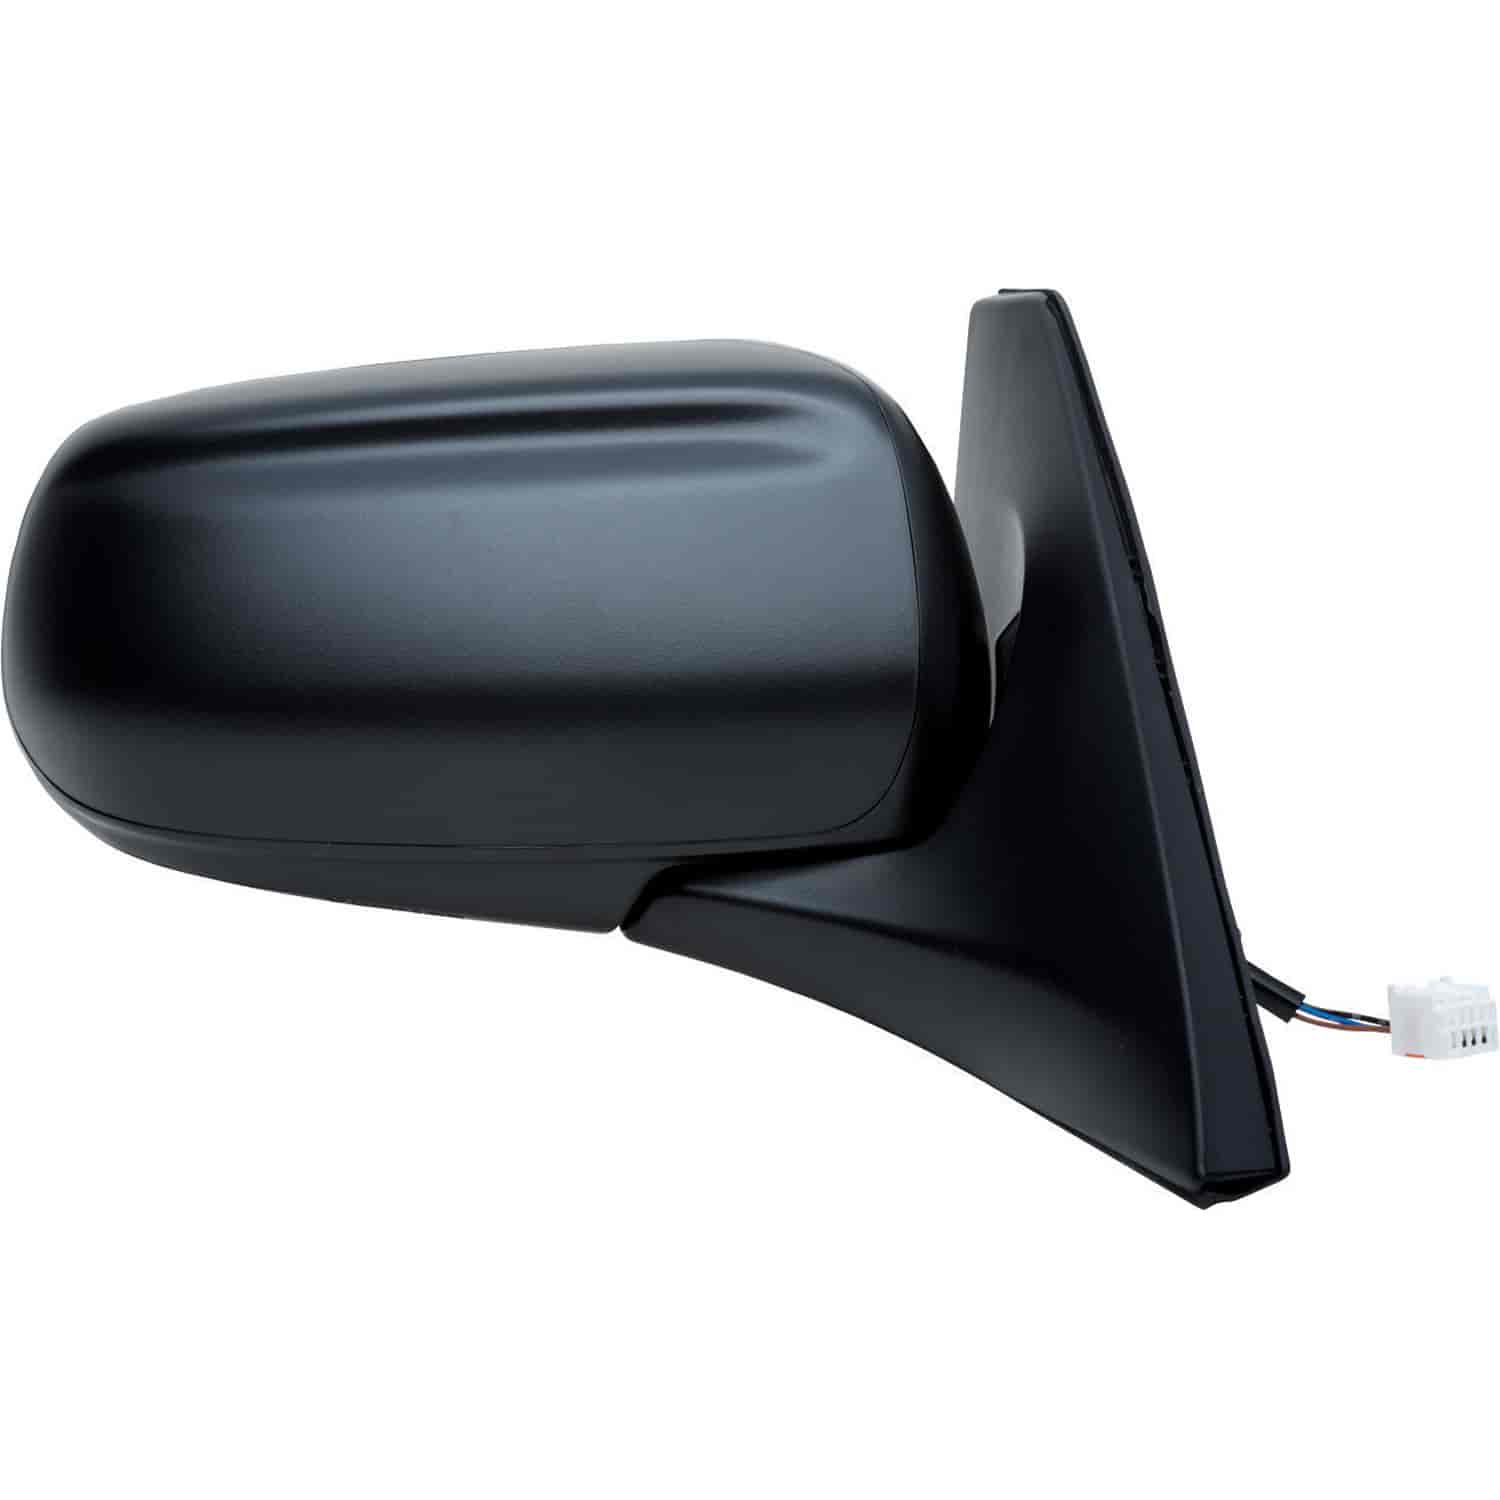 OEM Style Replacement mirror for 99-03 Mazda Prot g passenger side mirror tested to fit and function